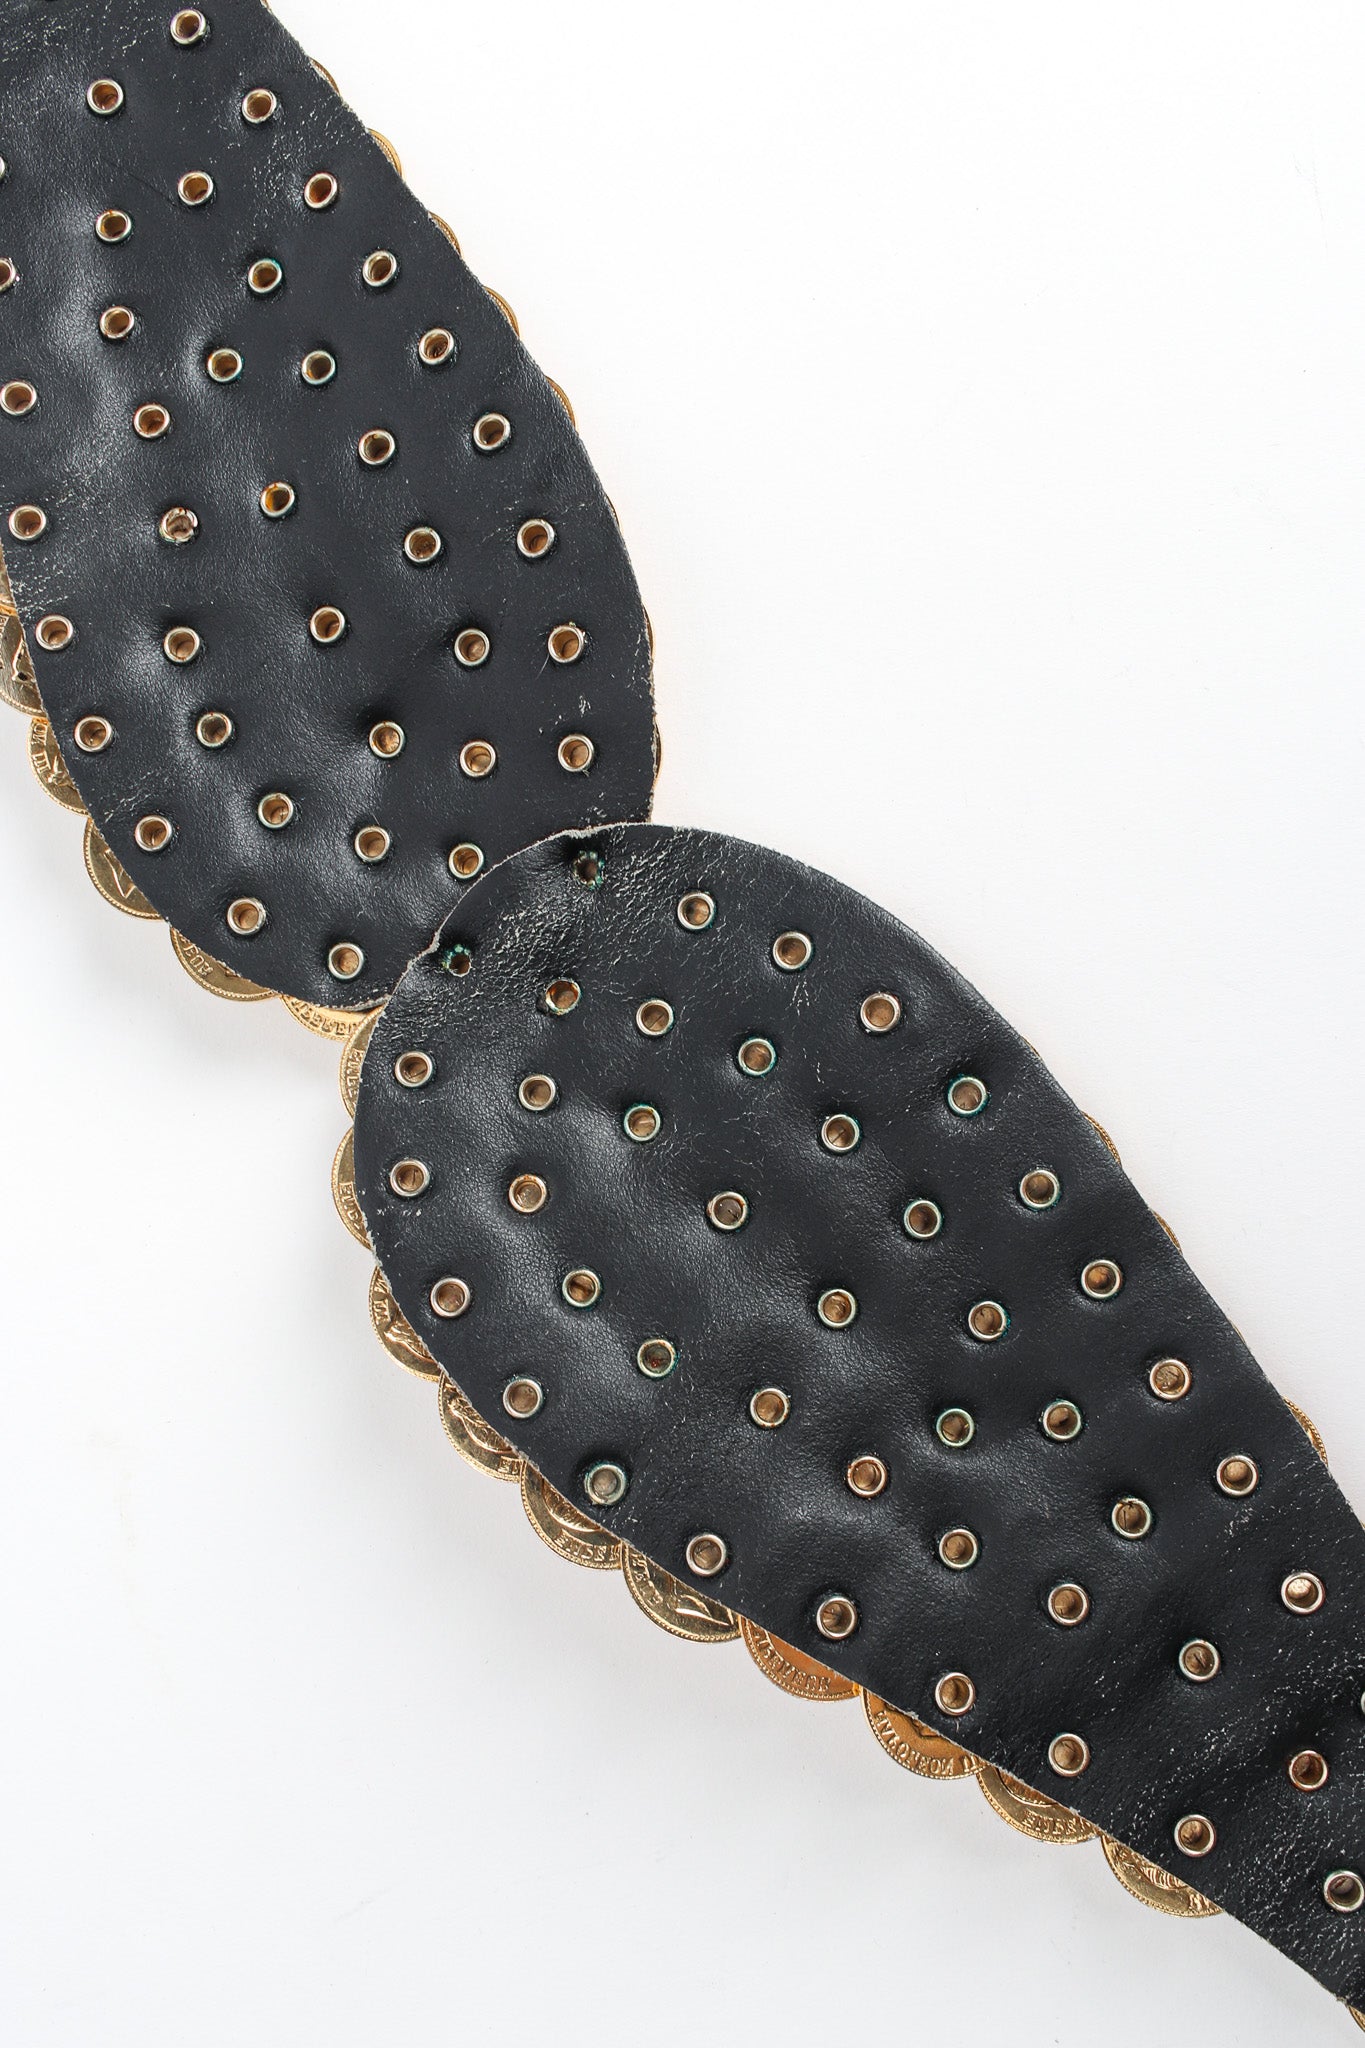 statement belt with gold coins by Jose Cotel inner studs and leather @recessla